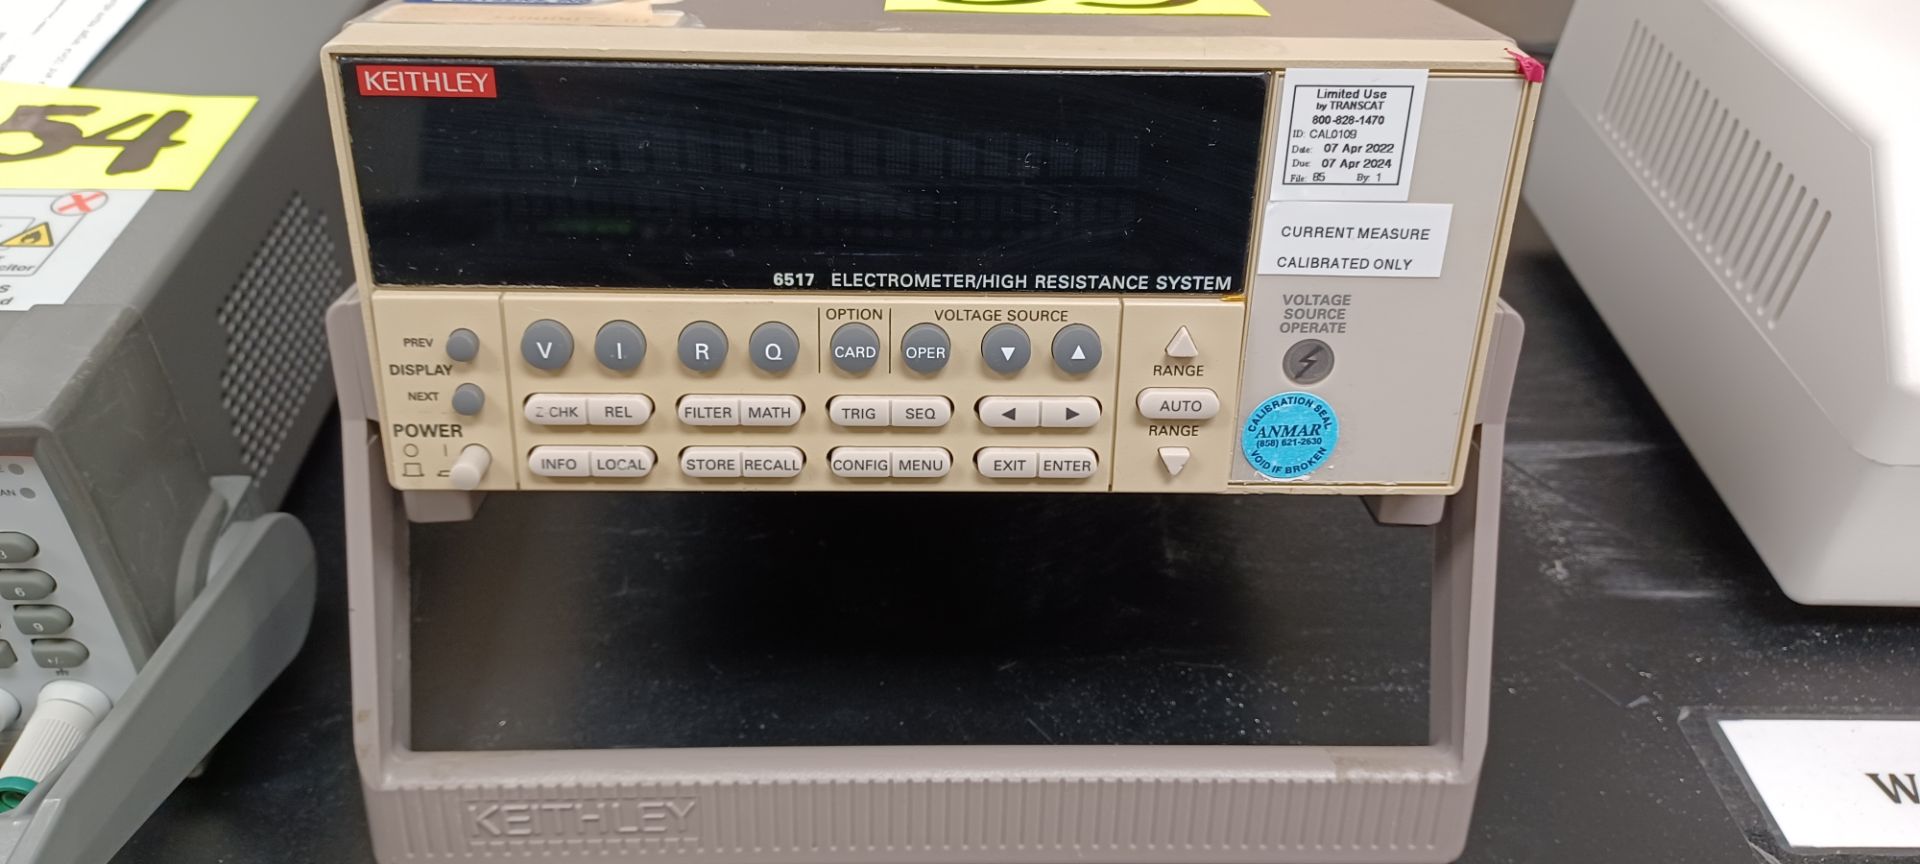 KEITHLEY 6517 ELECTROMETER/HIGH RESISTANCE SYSTEM, CALIBRATED UNTIL 4/2024